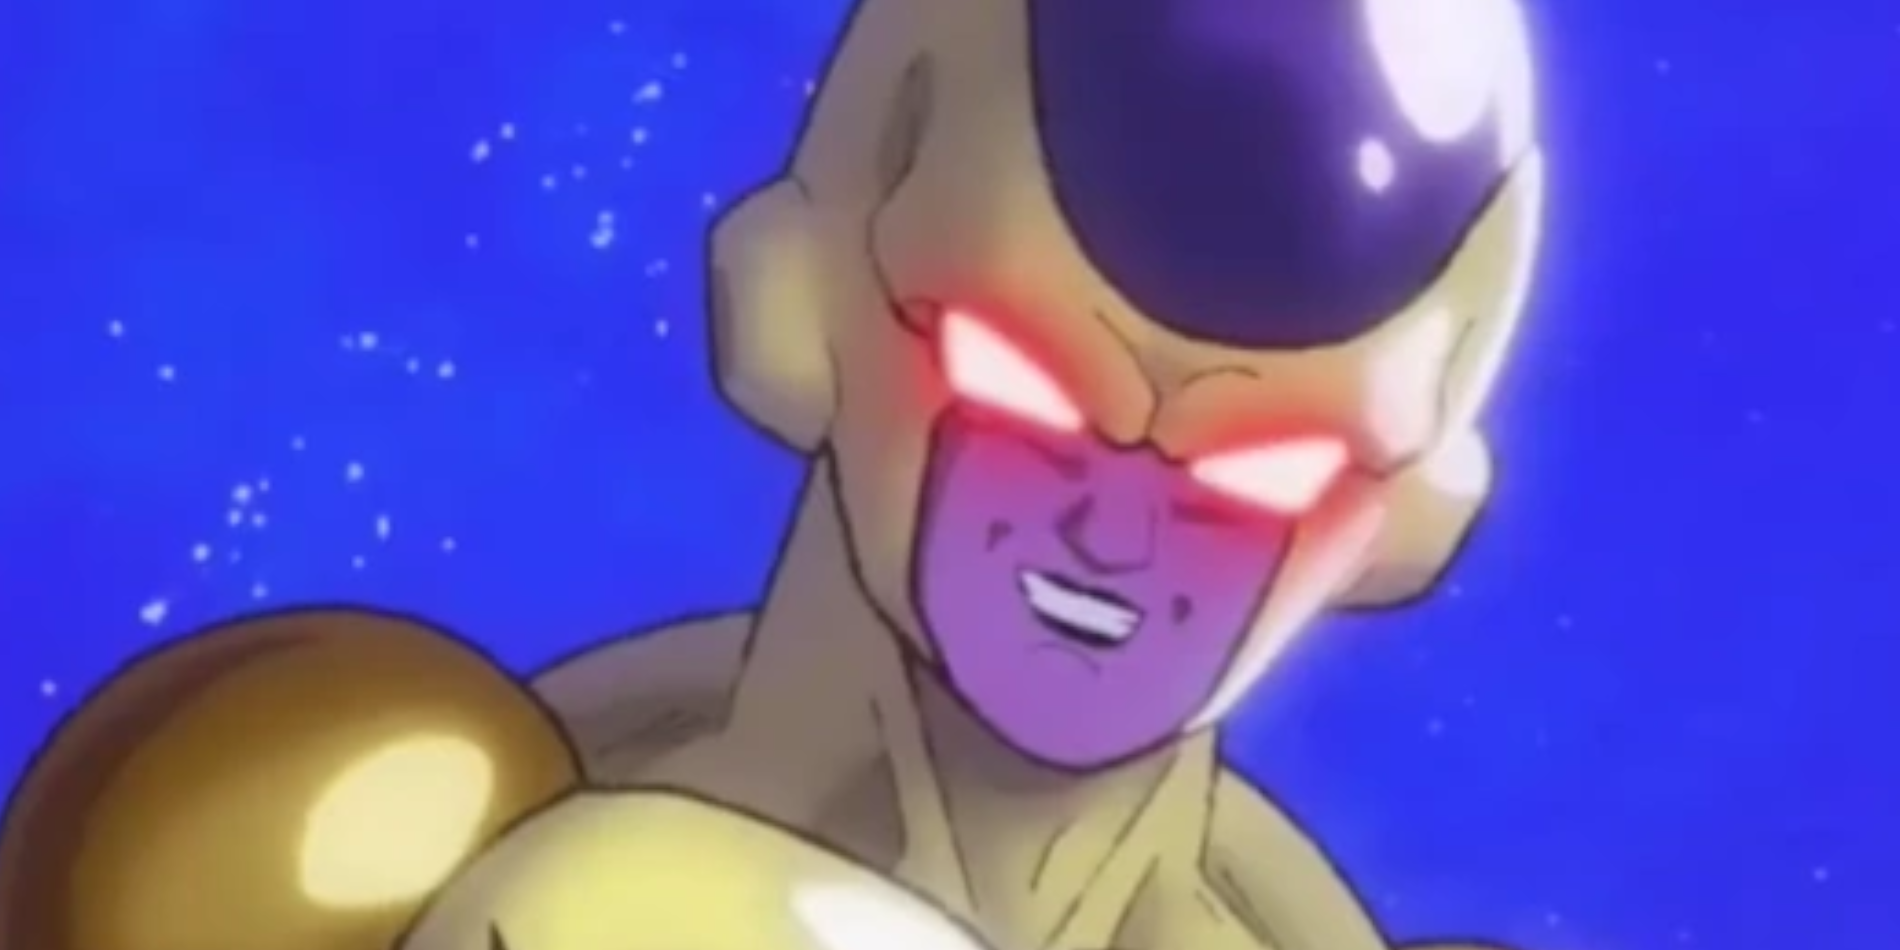 Frieza In his Xeno Golden Form is in front of a blue background.